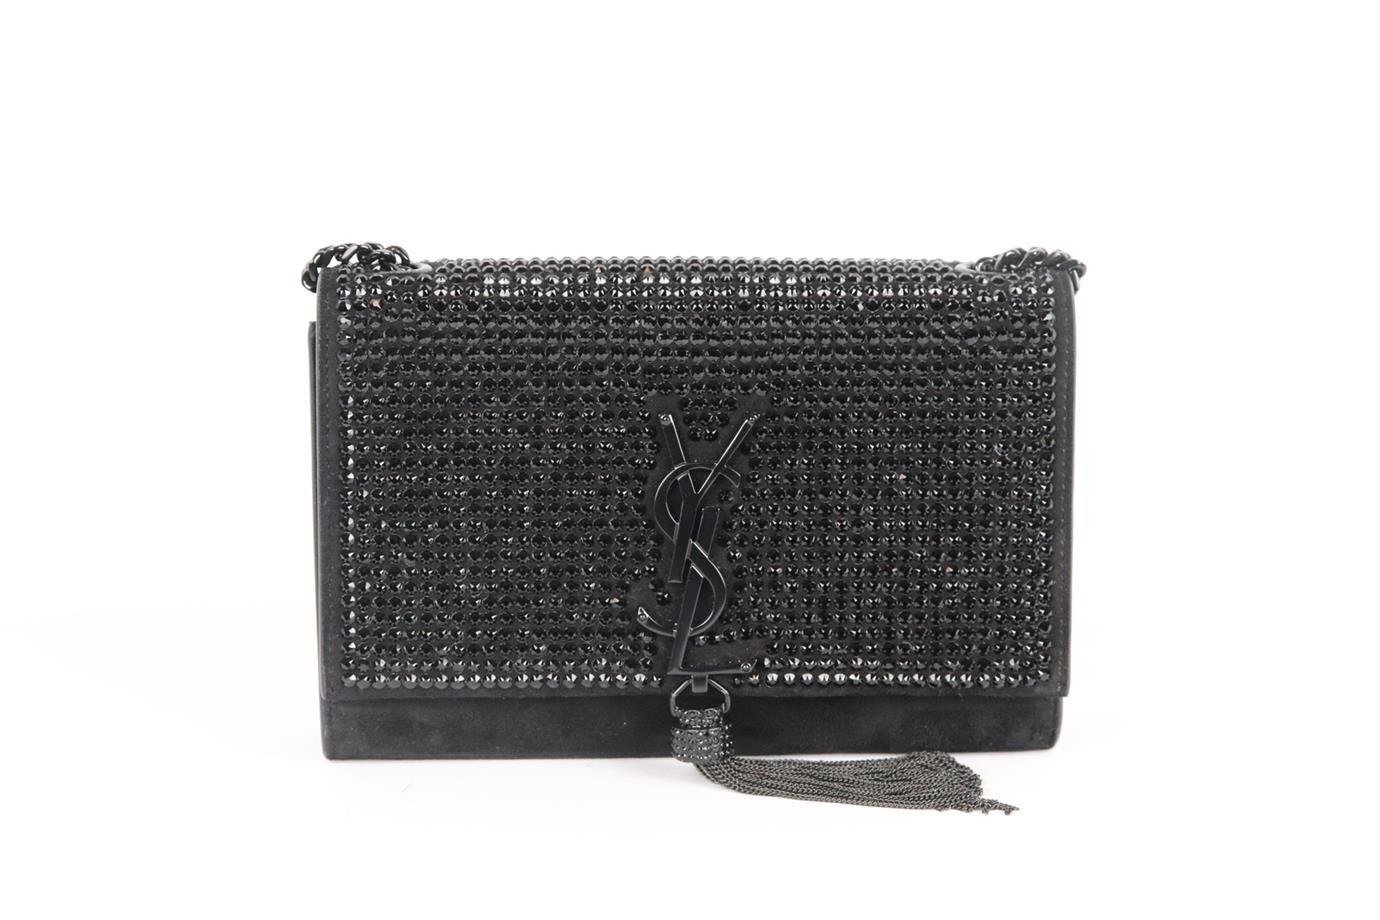 Saint Laurent Kate Monogramme small crystal embellished suede shoulder bag. Made from black suede with matching black crystals on the front flap and finished with the brand’s signature 'YSL' plaque and chain tassel on the front in matt black. Black